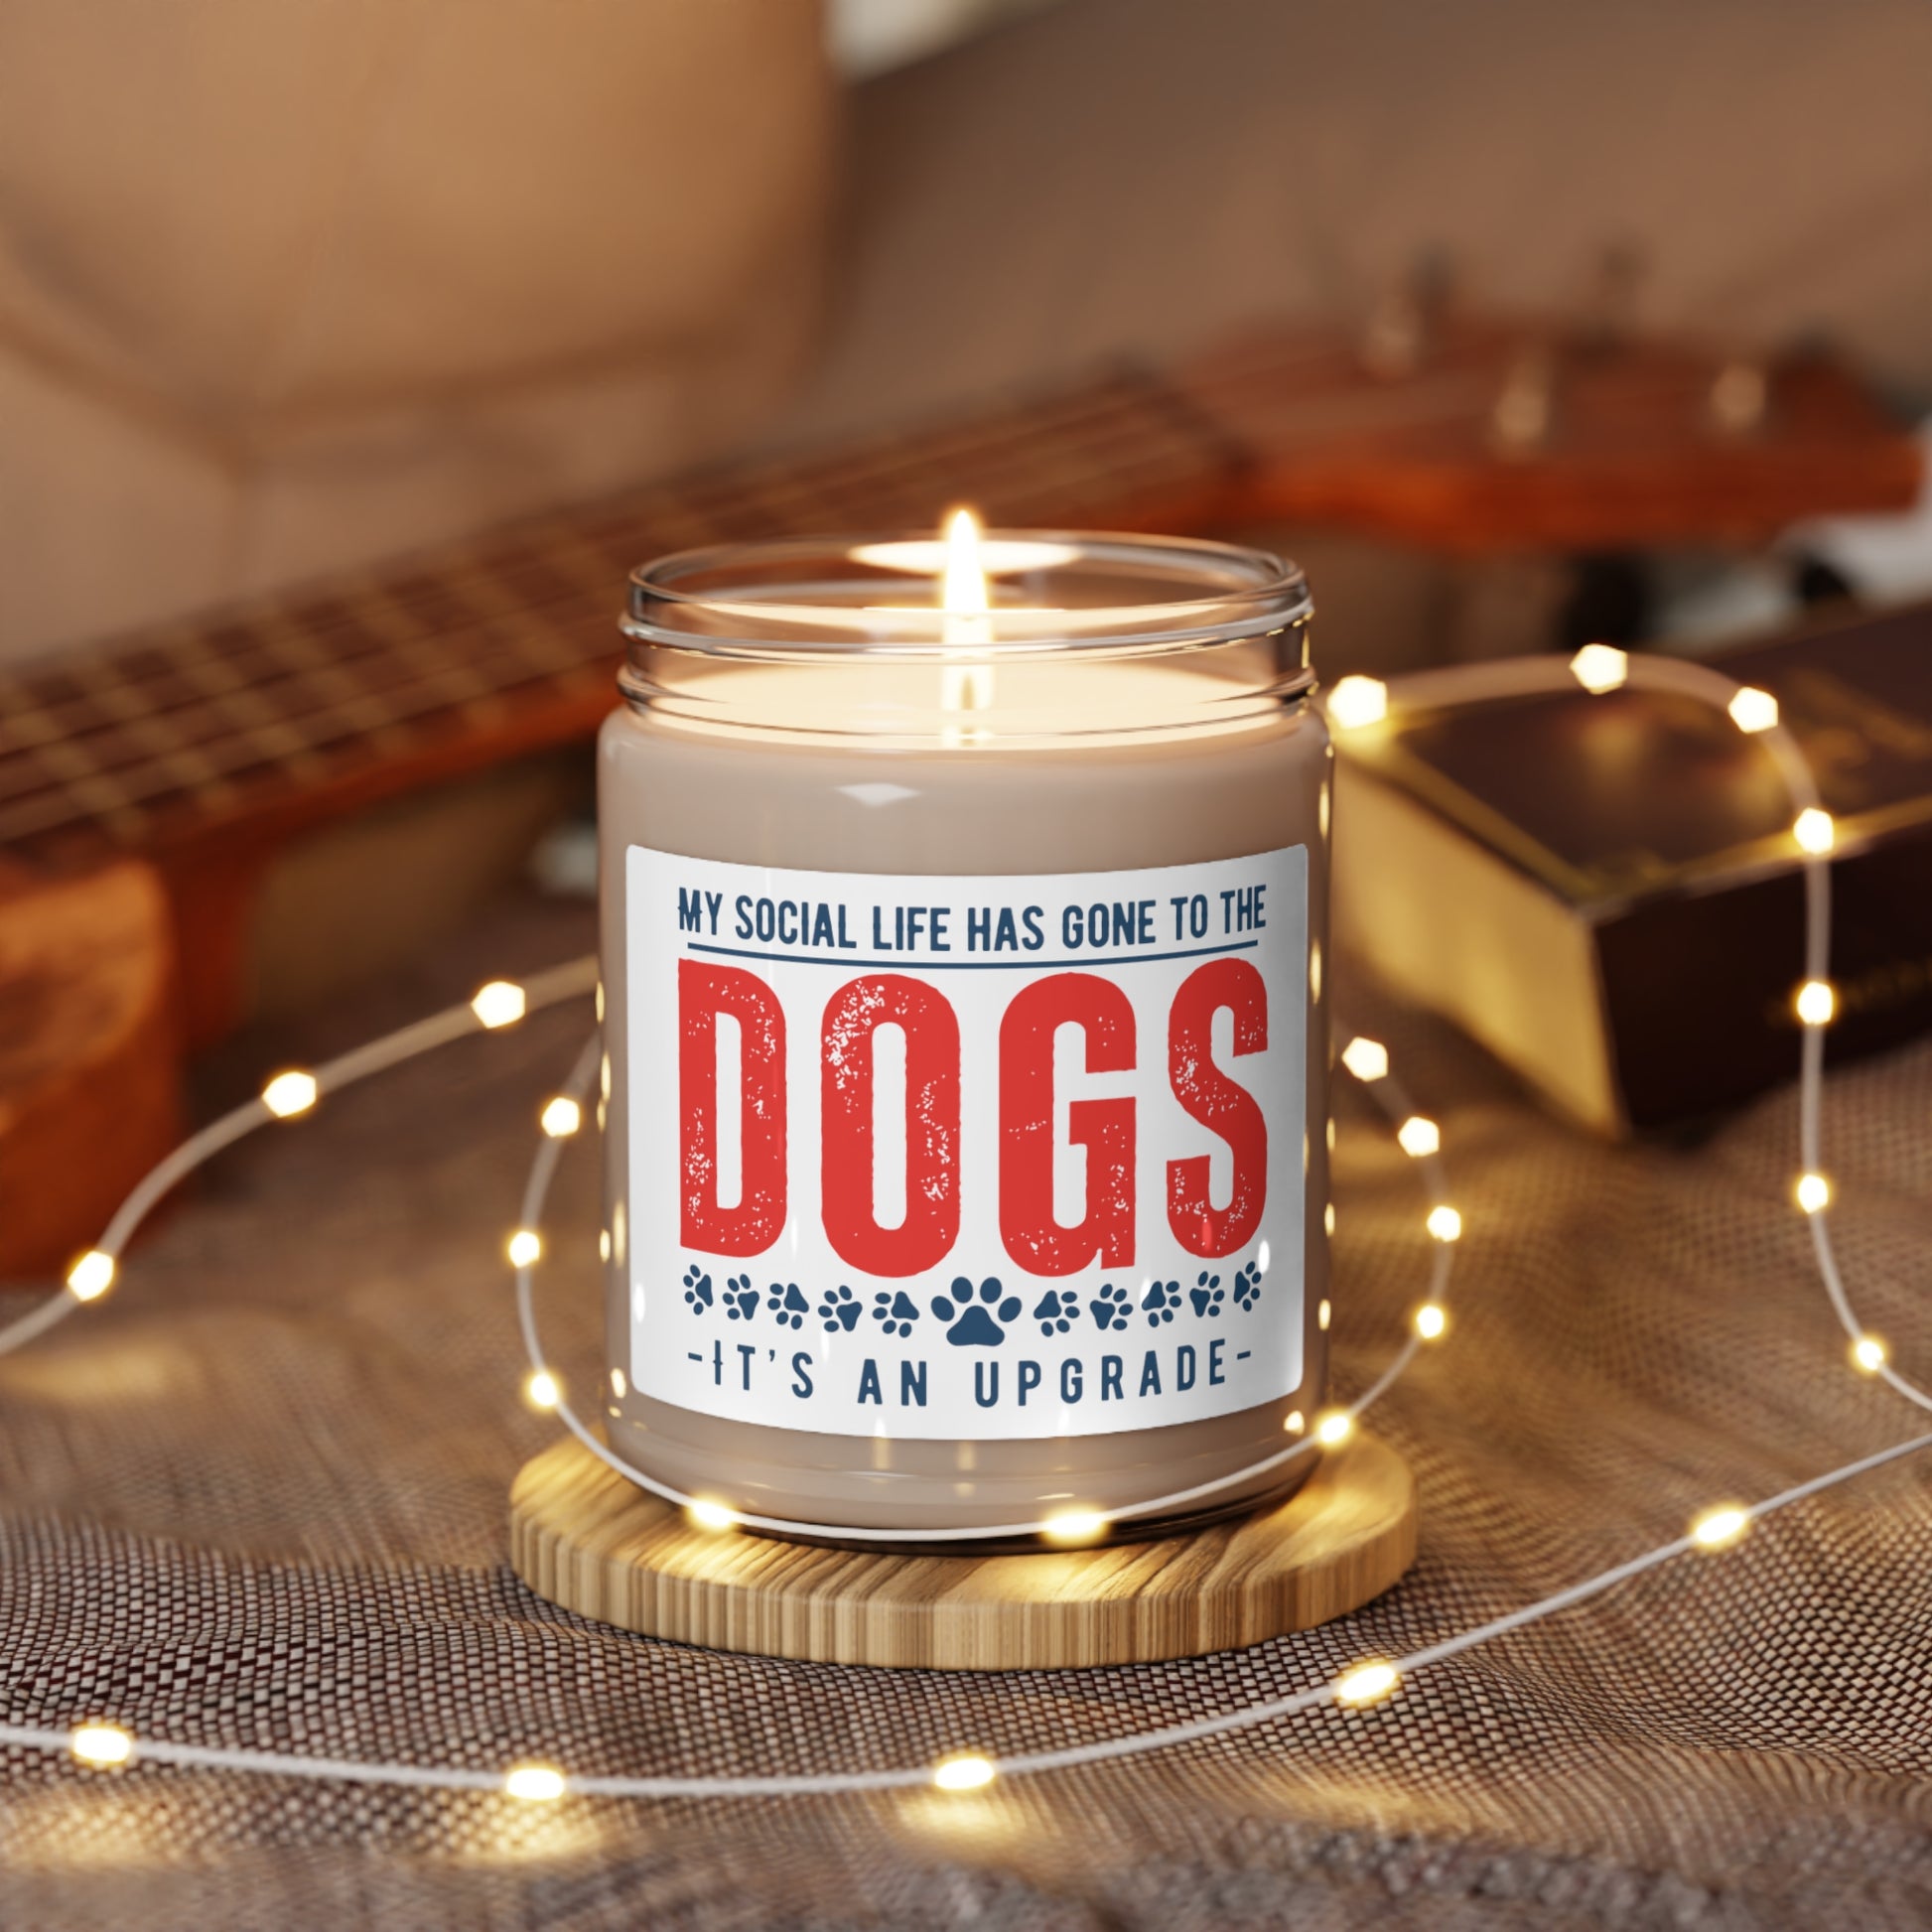 Dog-themed scented soy candle for a true dog enthusiast